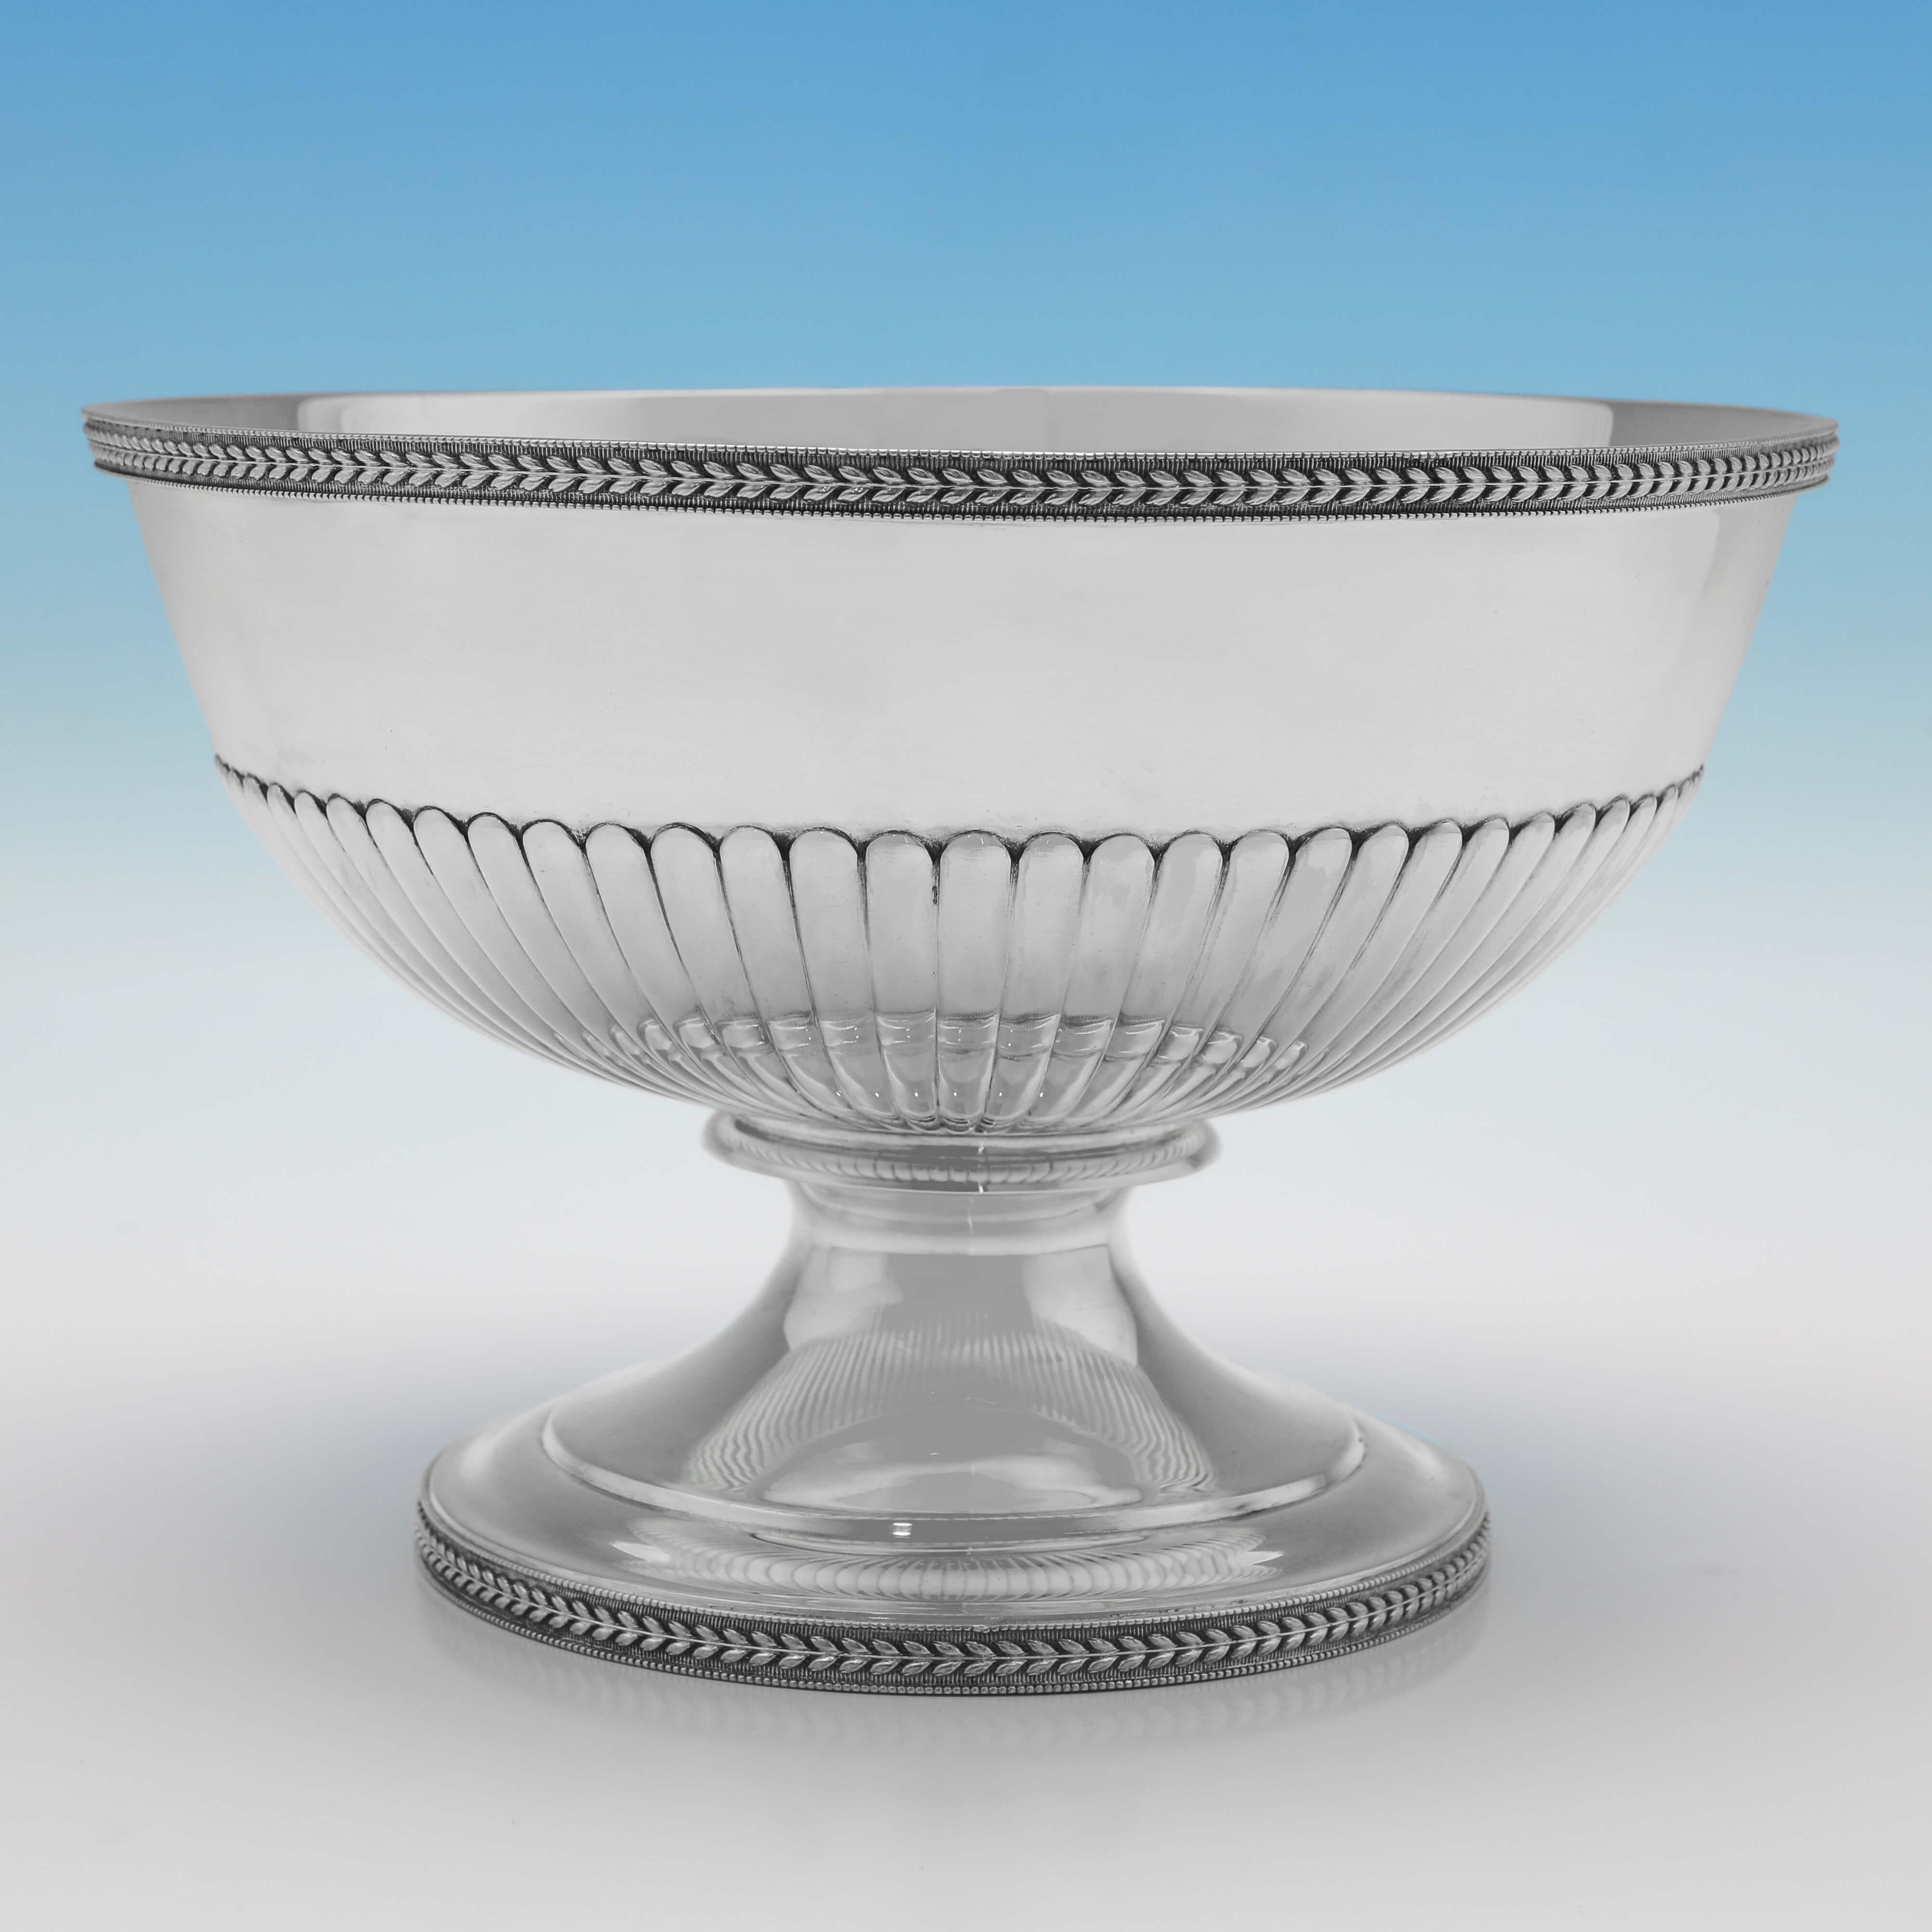 Hallmarked in London in 1803 by John Emes, this handsome, George III period, Antique Sterling Silver Bowl, stands on a pedestal foot, and features half fluting, and rope borders. 

The bowl measures 5.5